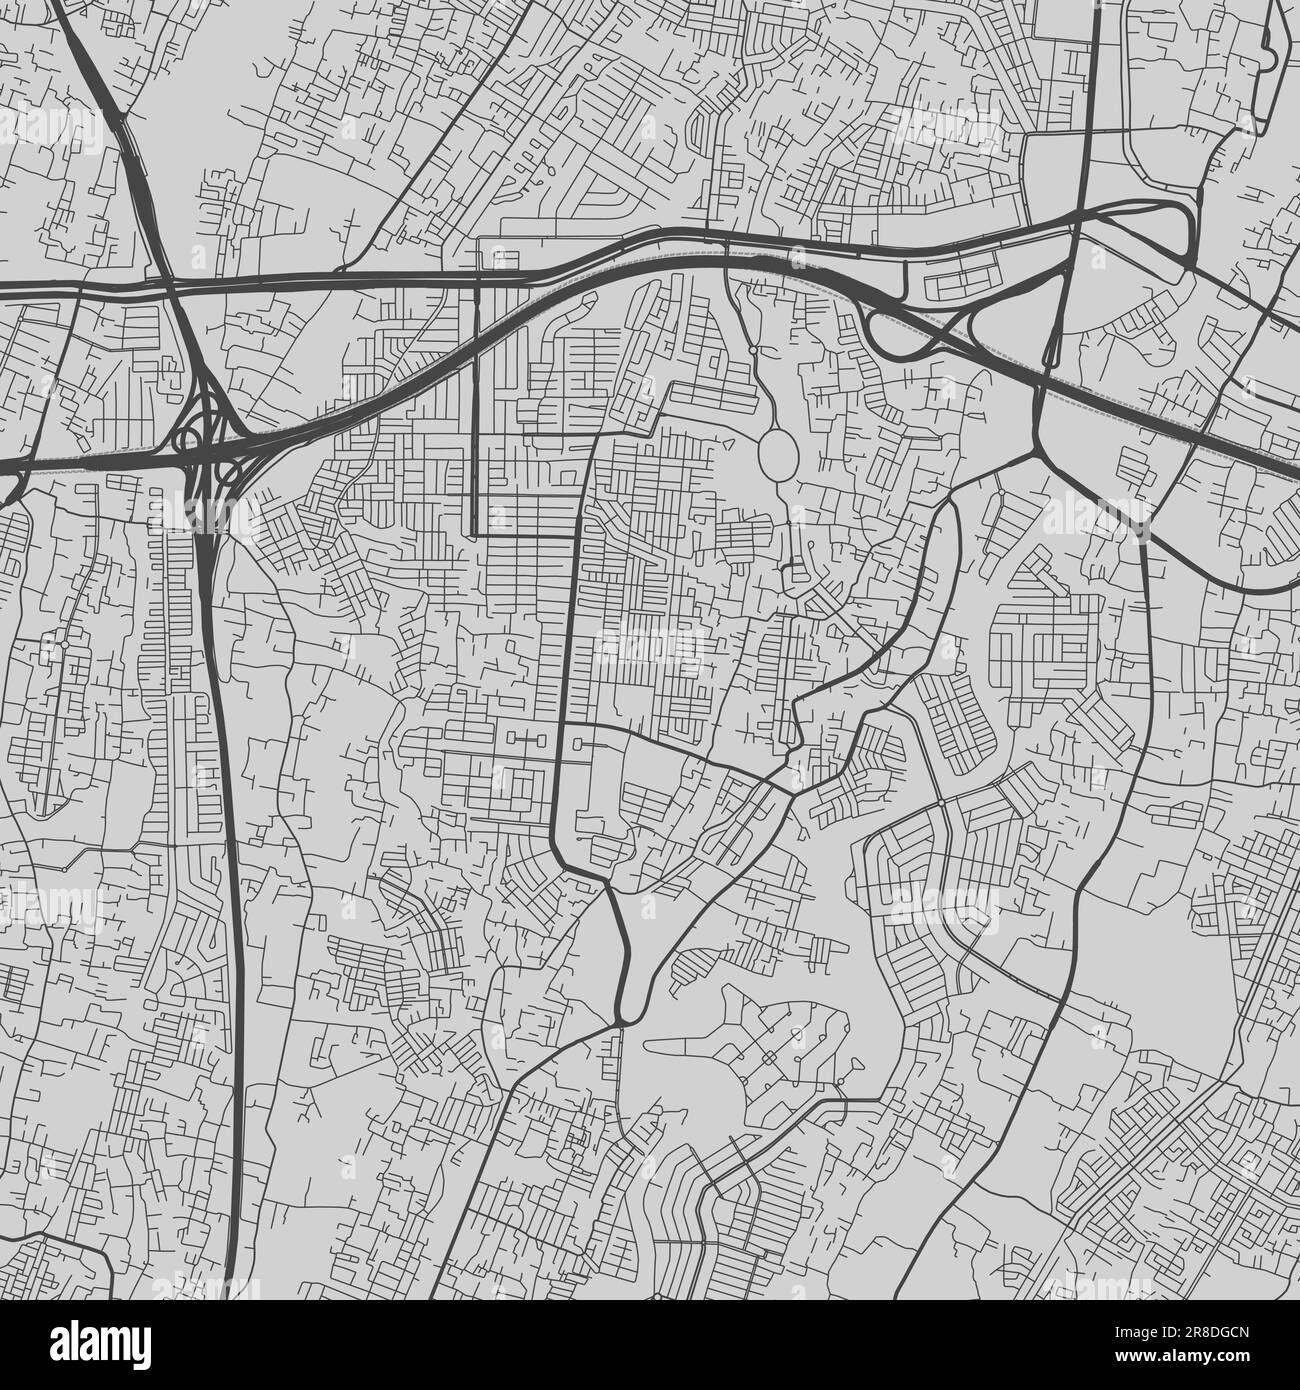 Map of Bekasi city. Urban black and white poster. Road map image with metropolitan city vertical area view. Stock Vector